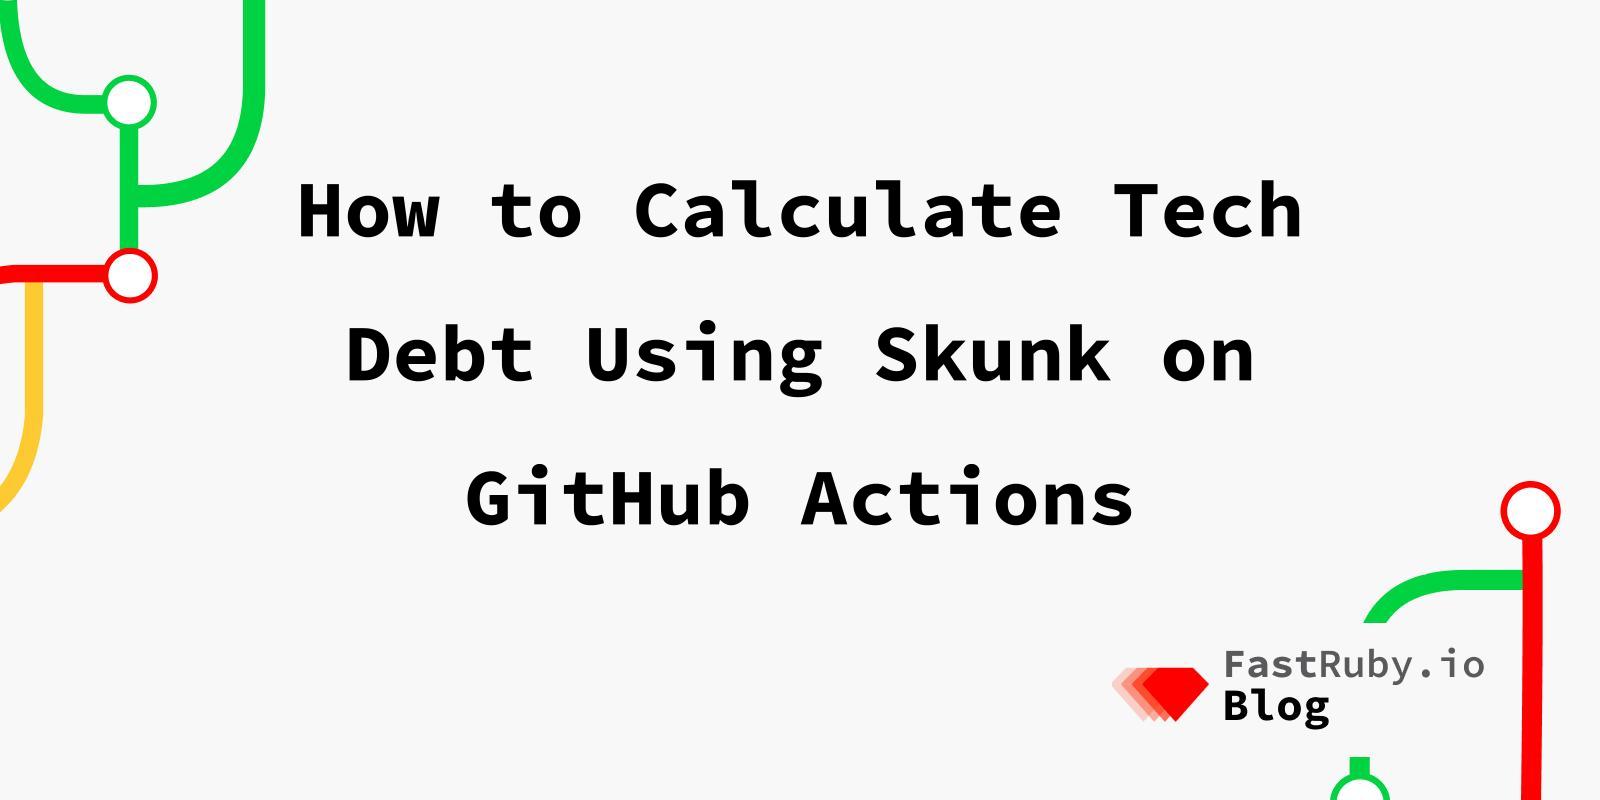 How to Calculate Tech Debt Using Skunk on GitHub Actions